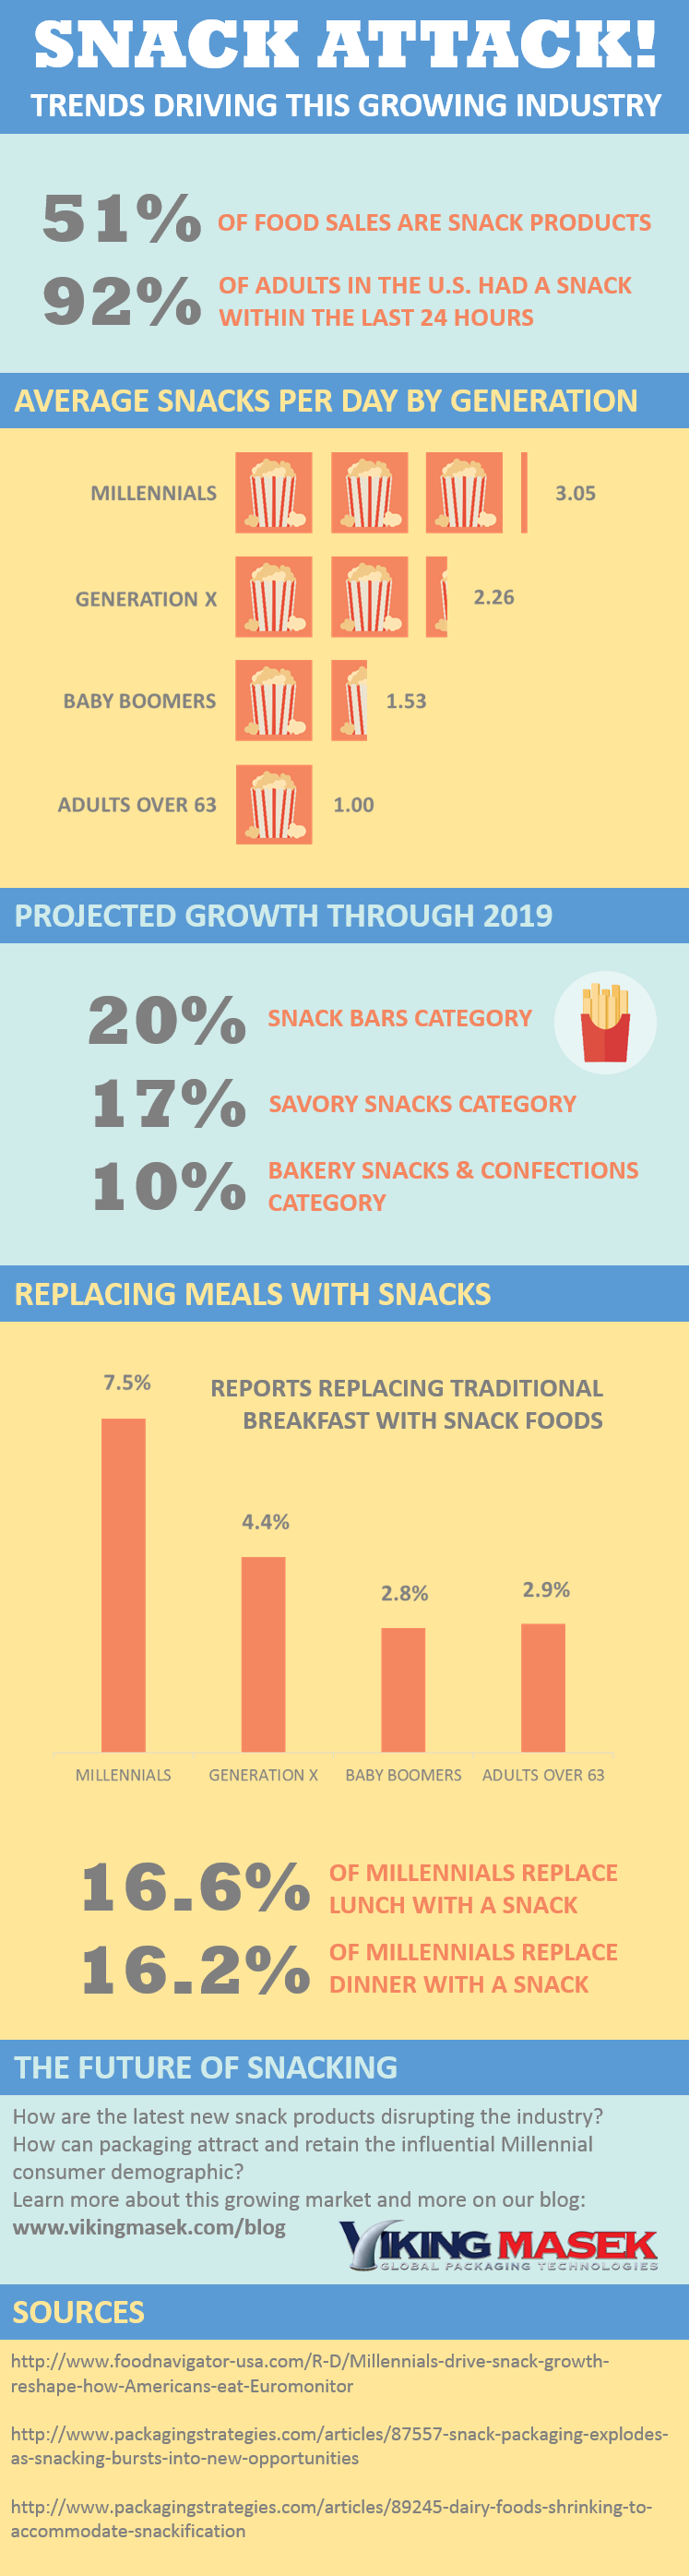 Snack_Attack_Infographic.png